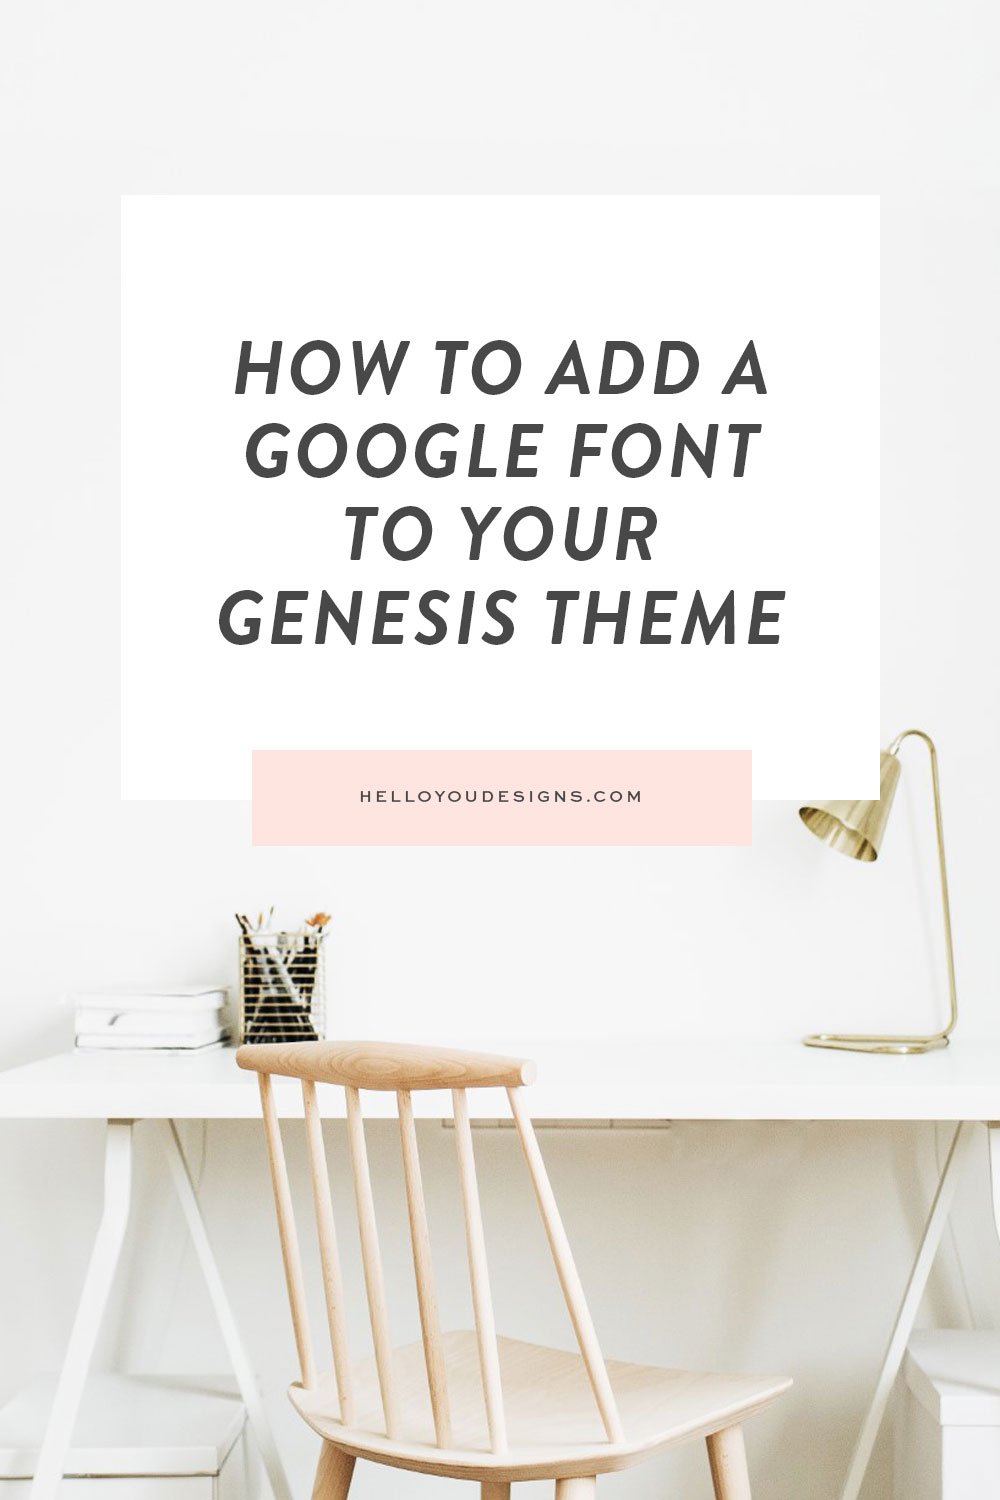 How to Add a Google Font